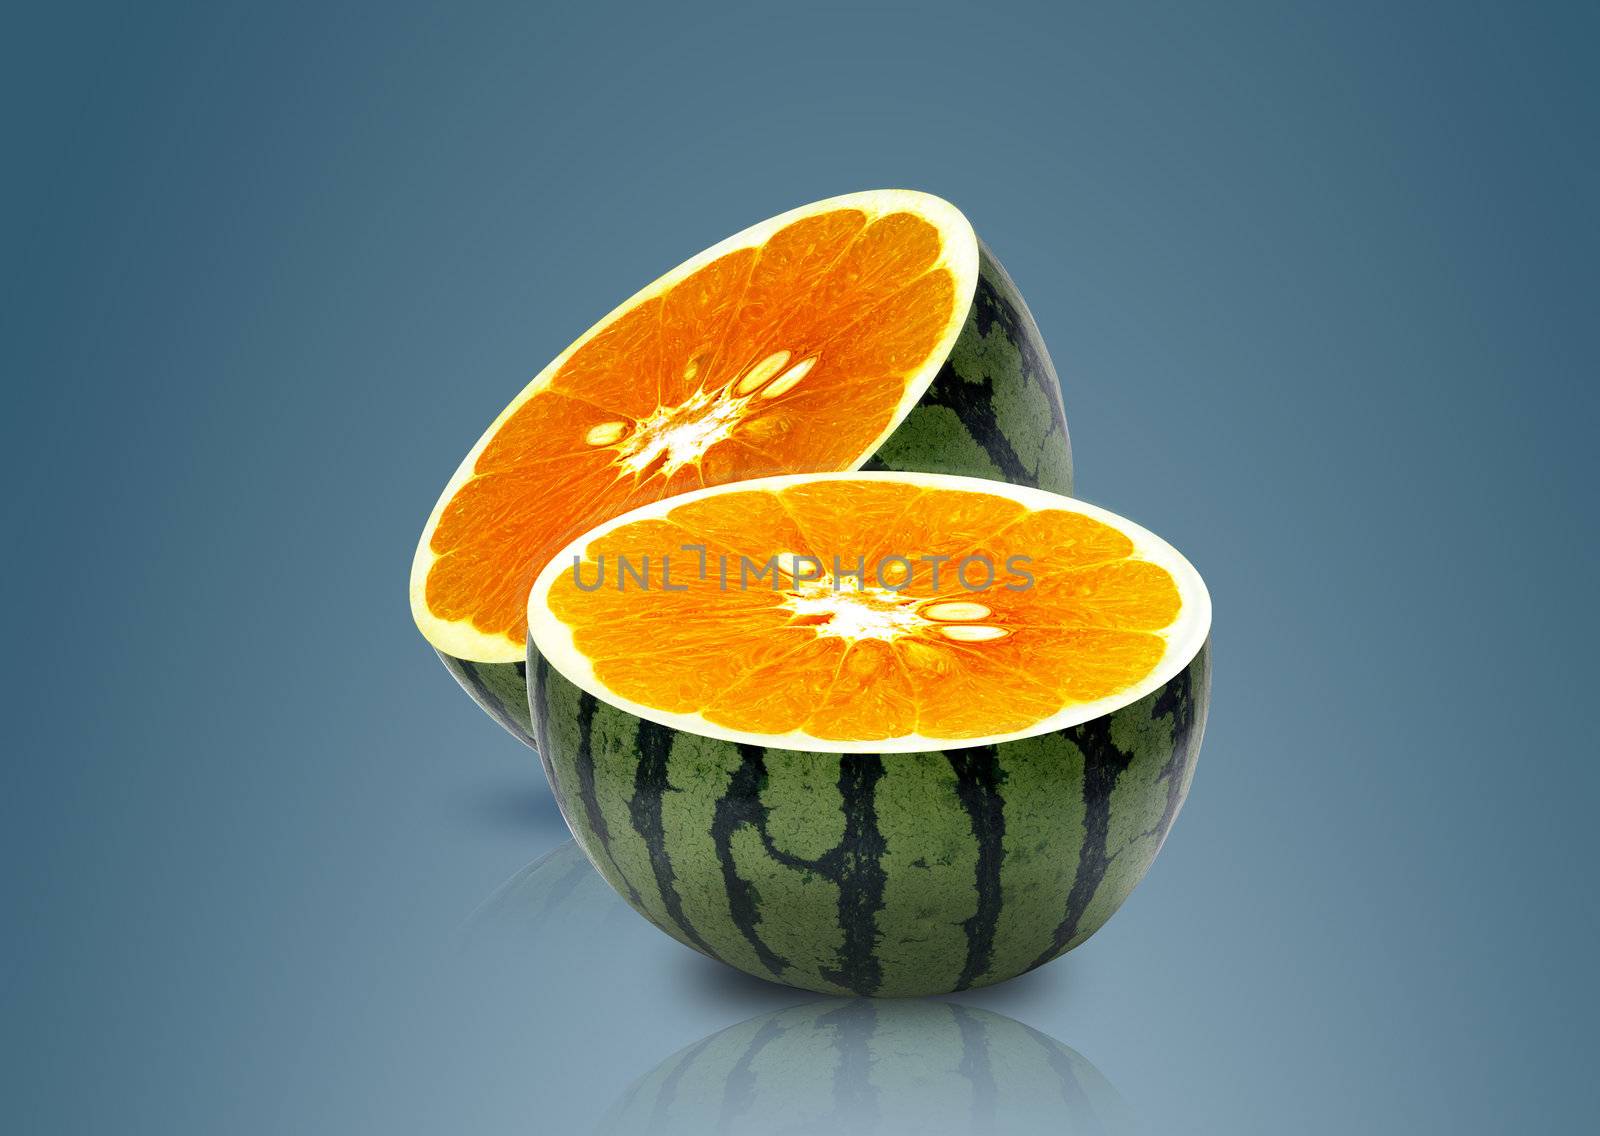 Water melon and Orange inside by designsstock